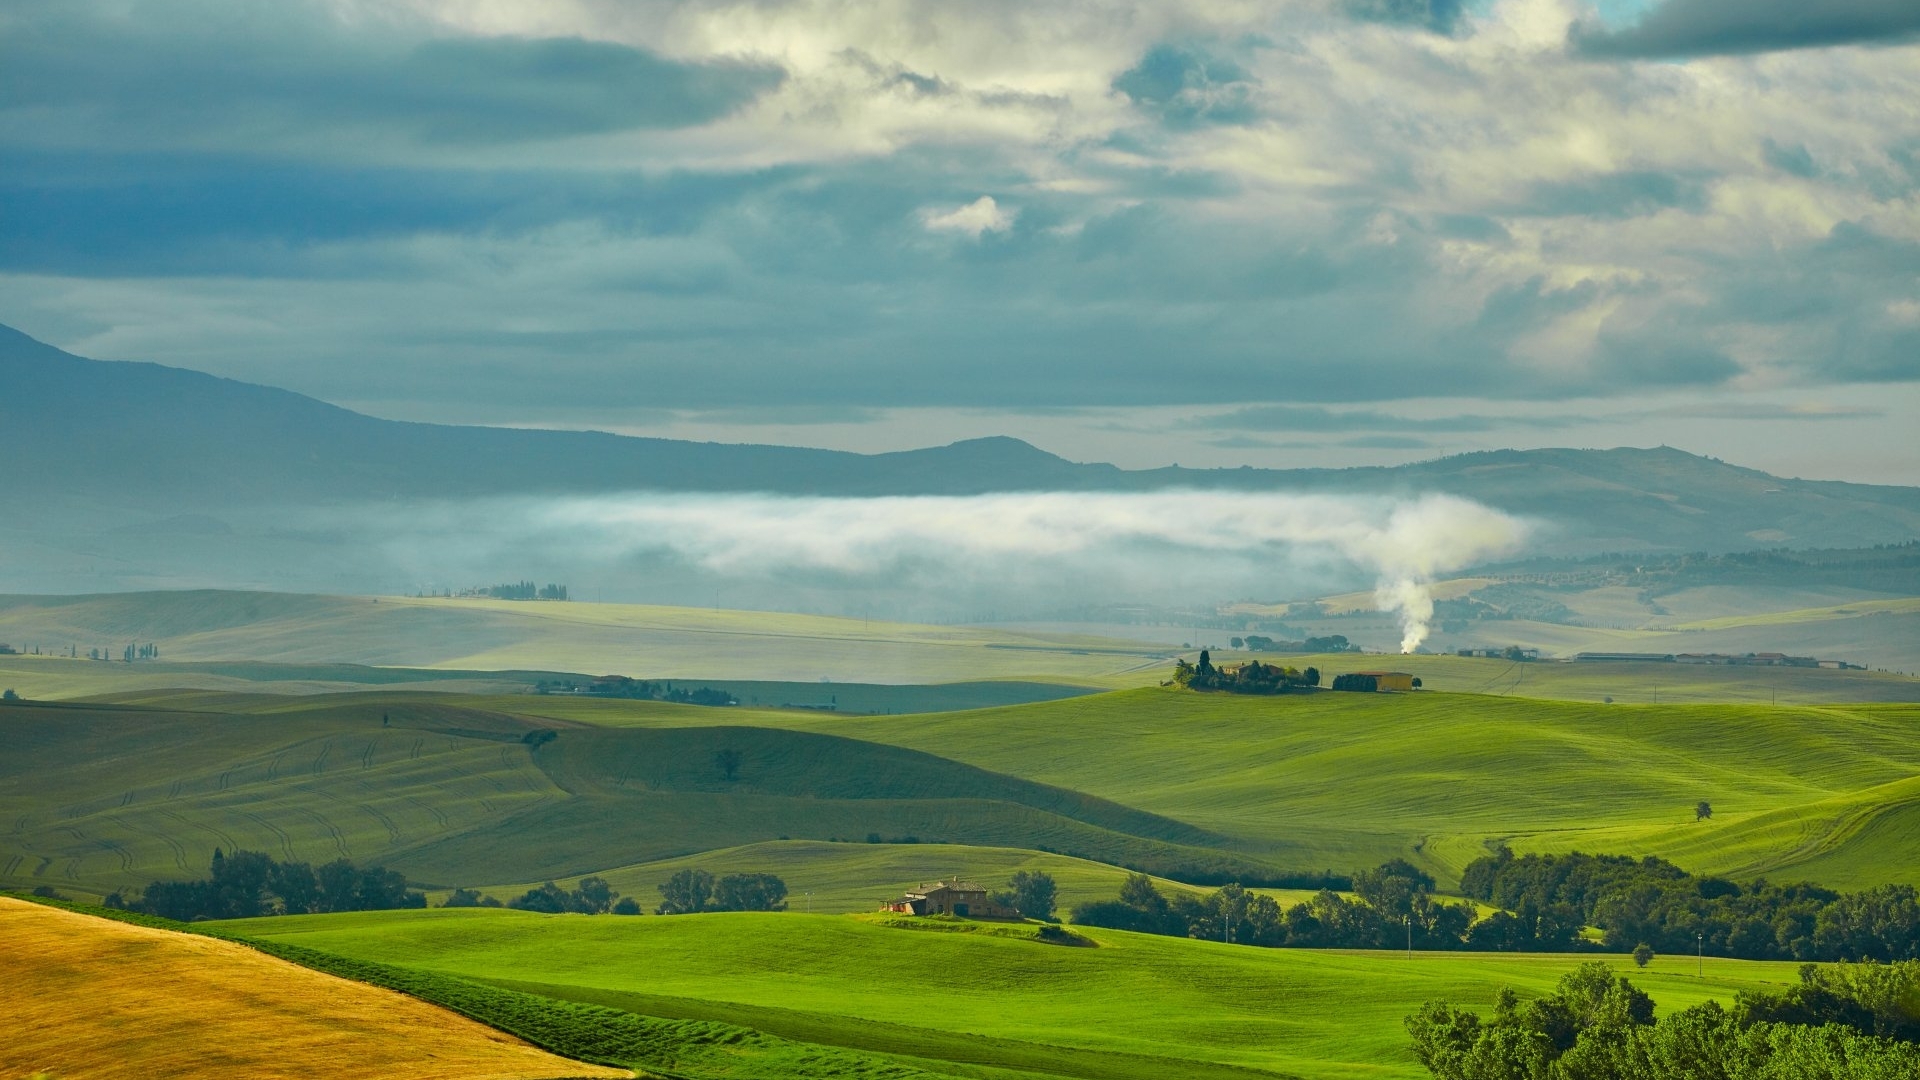 General 1920x1080 nature landscape trees Tuscany hills Italy mist field grass clouds